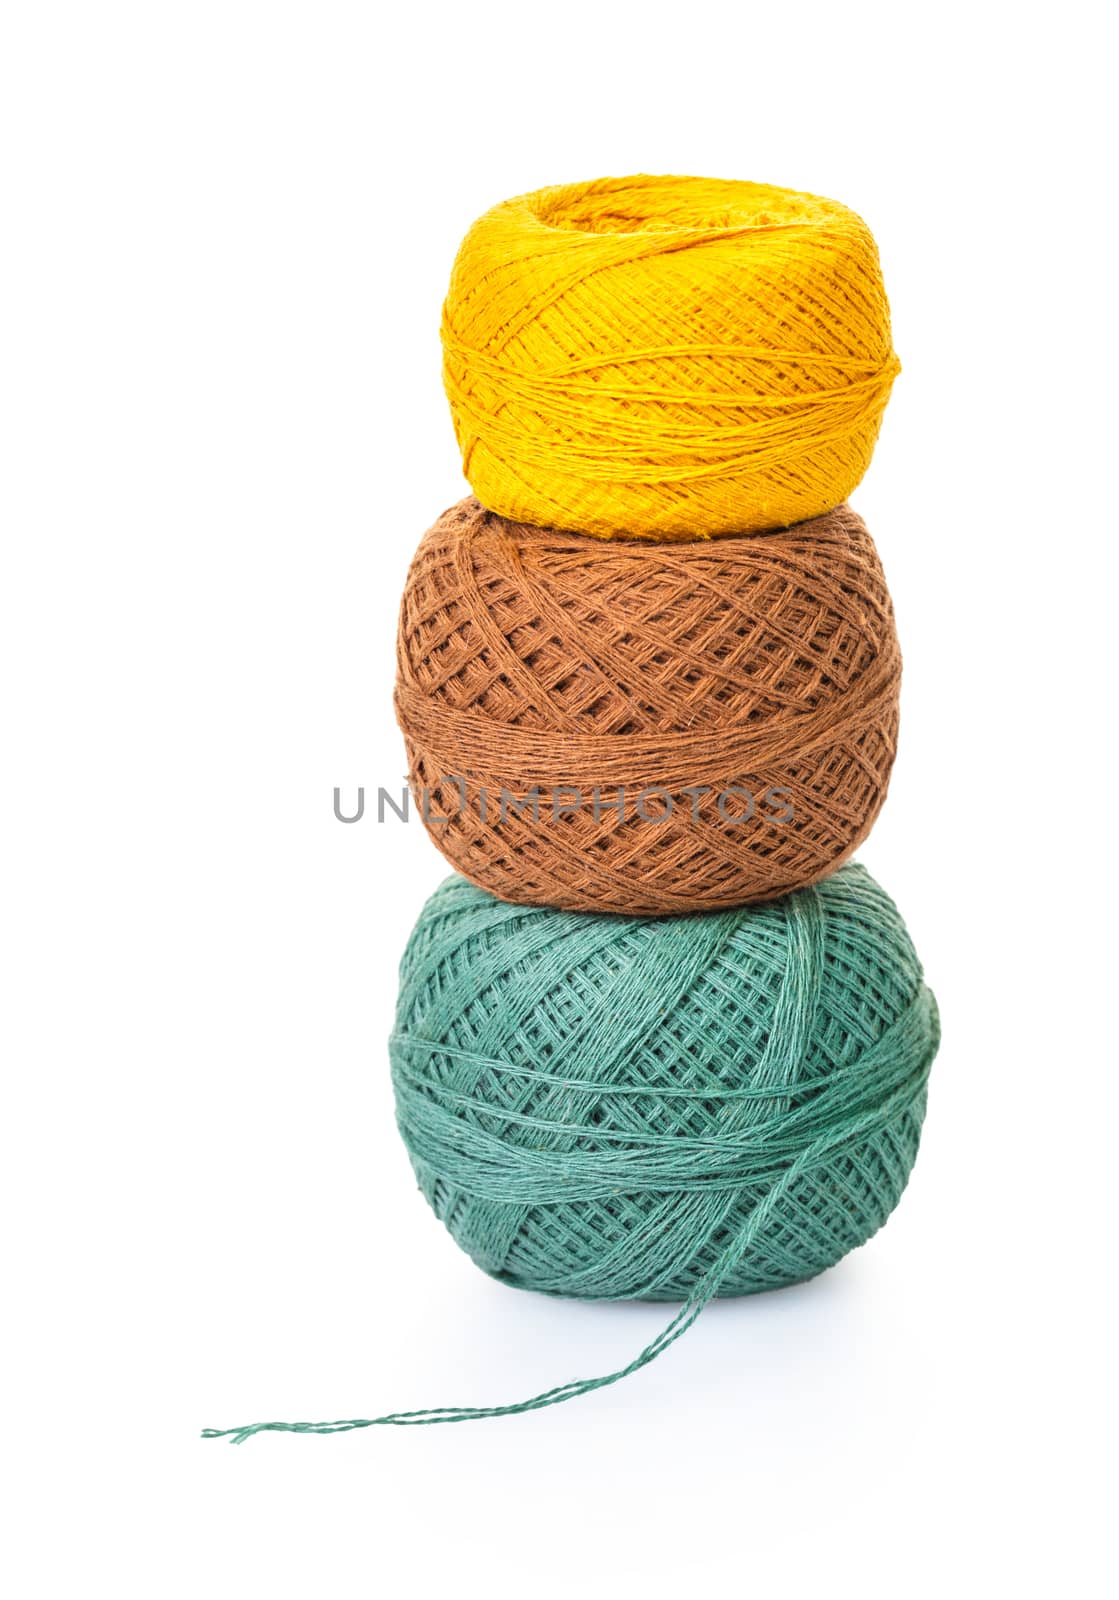 tangle of thread for knitting on white isolated background